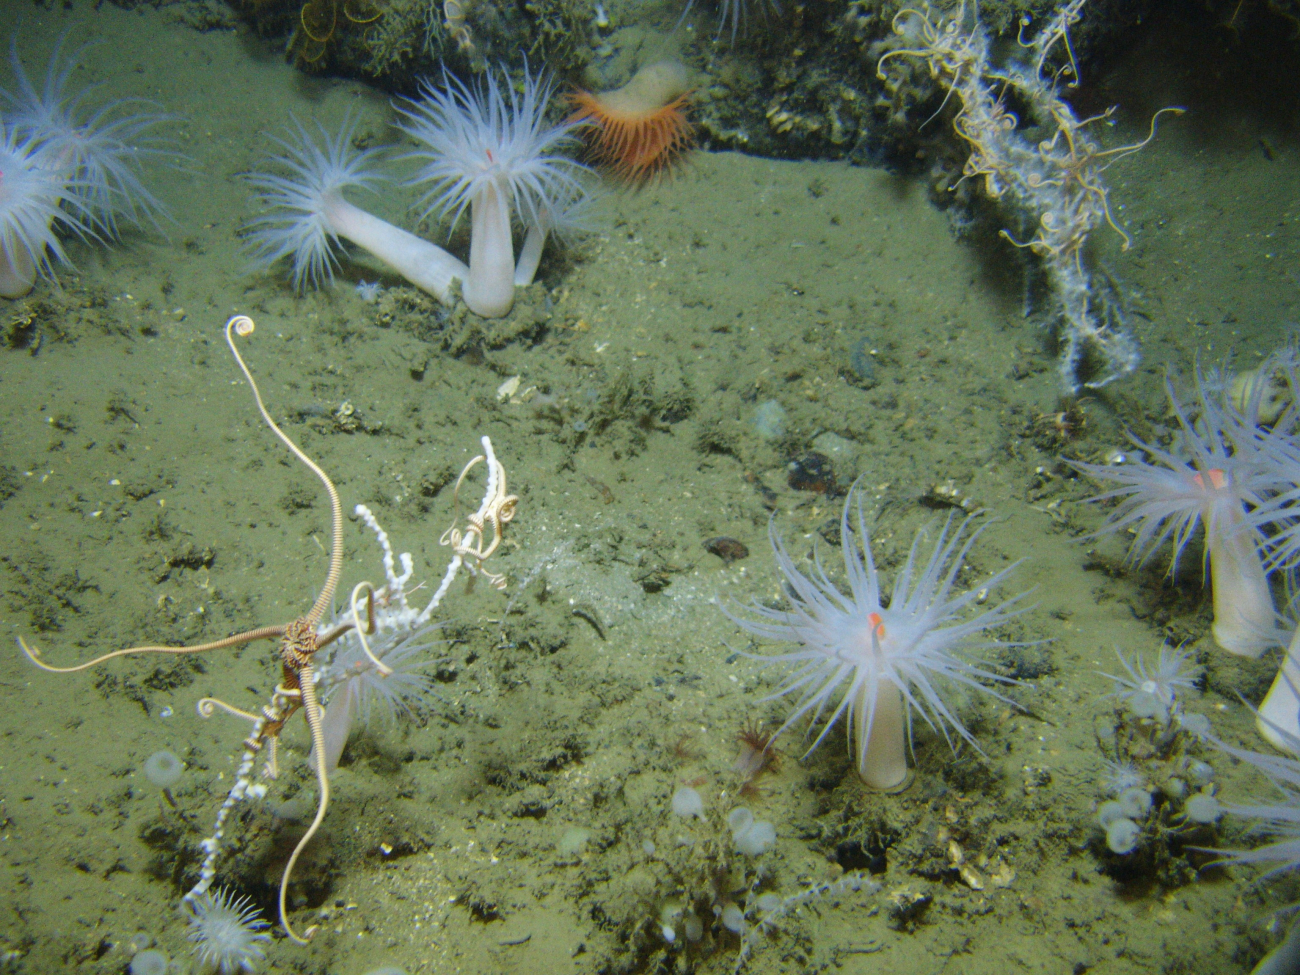 Brittle stars cover small white corals, small white globular sponges, and whiteanemones with orange mouths